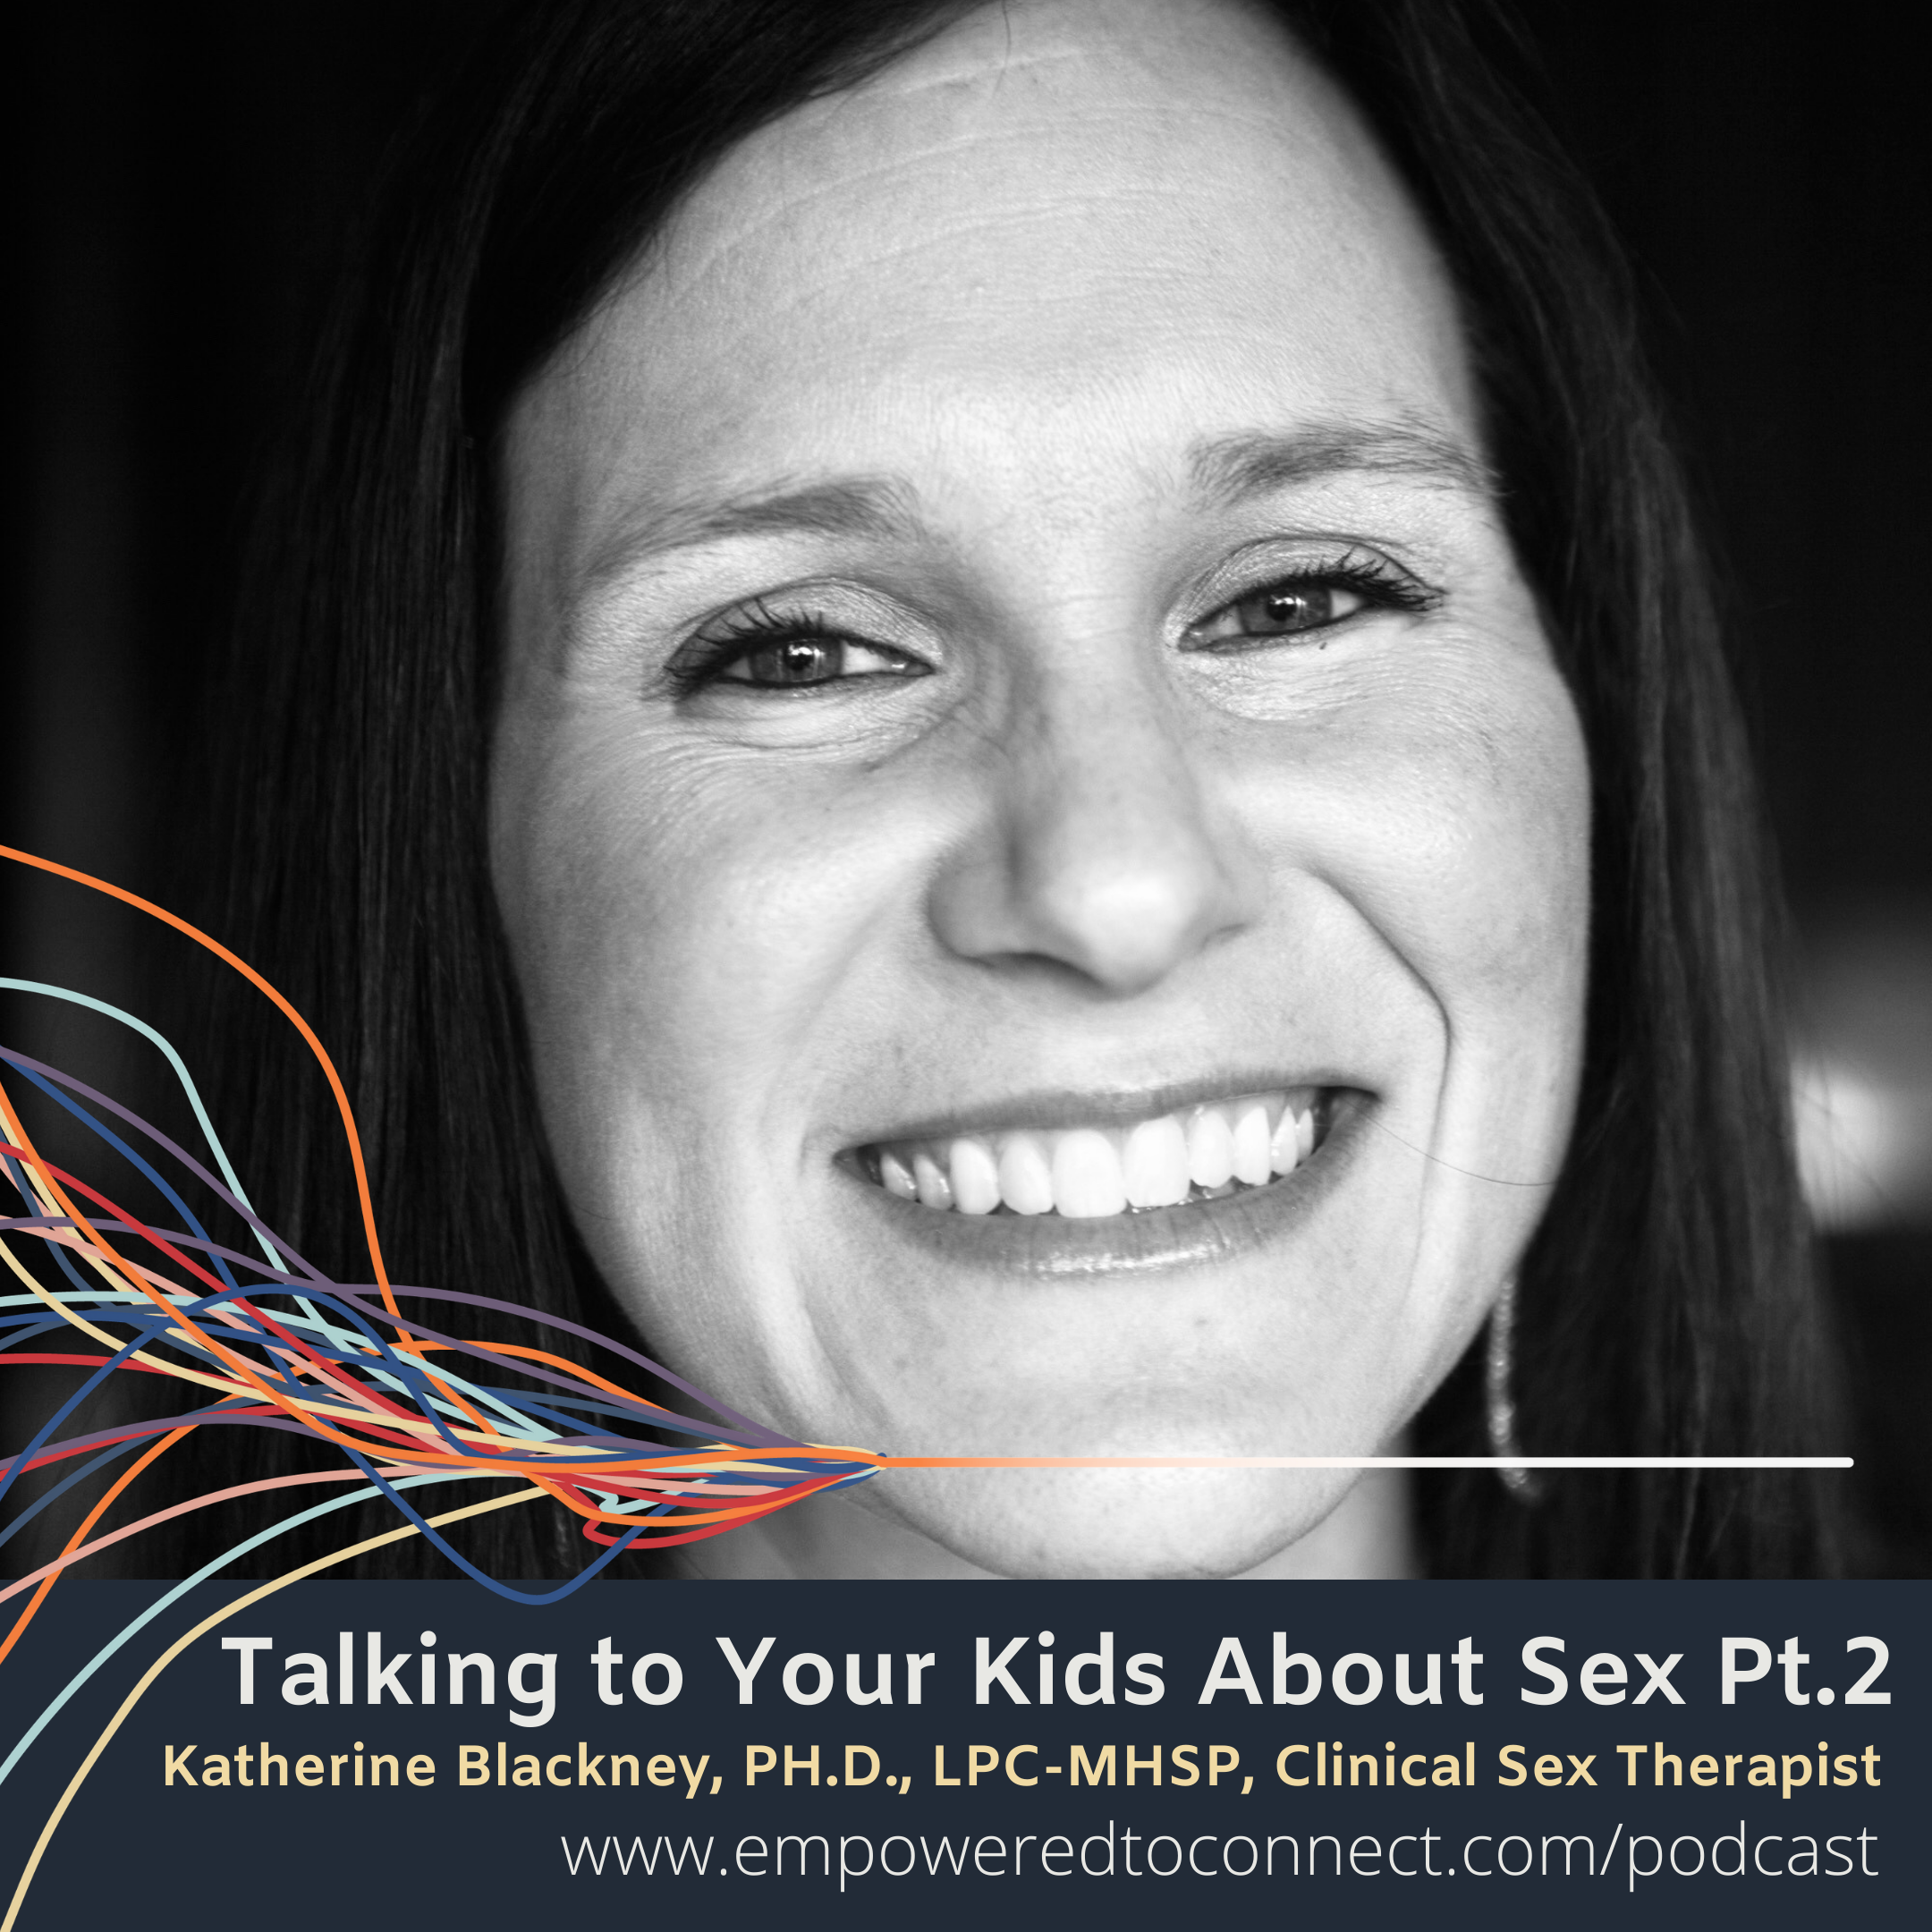 [E13] Talking to Your Kids About Sex (Pt 1) with Dr. Katherine Blackney